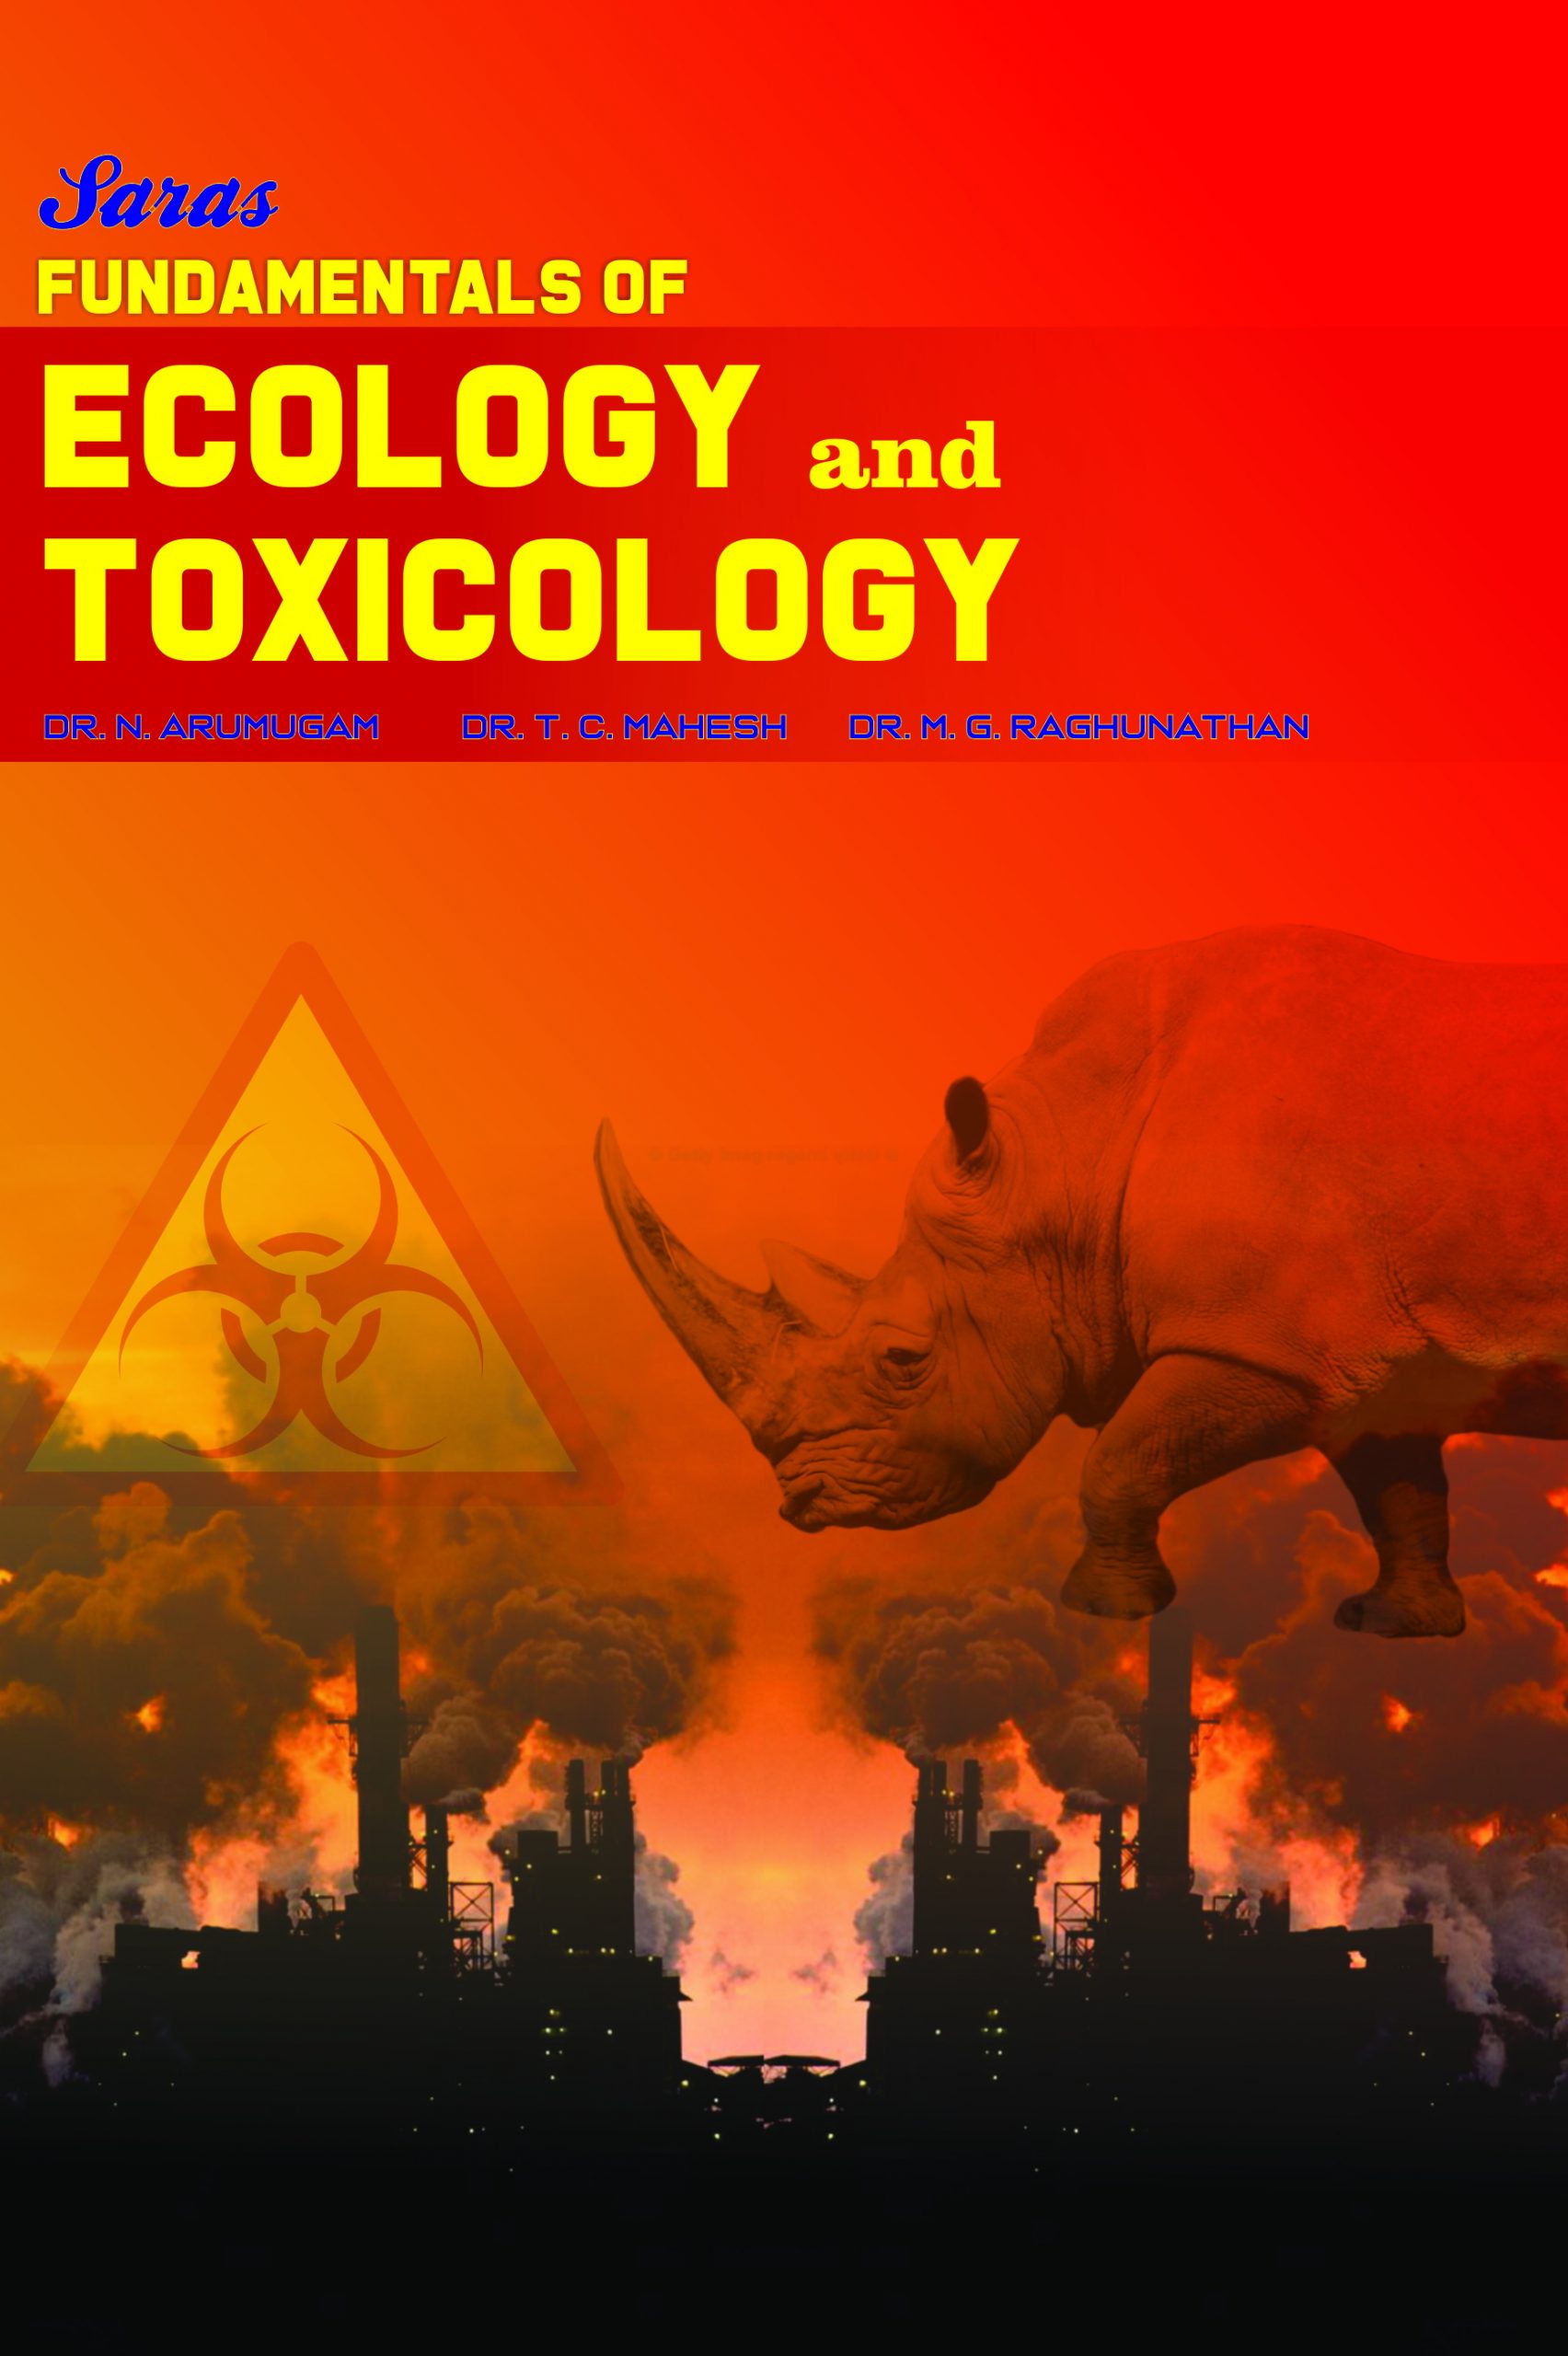 Fundamentals of Ecology and Toxicology